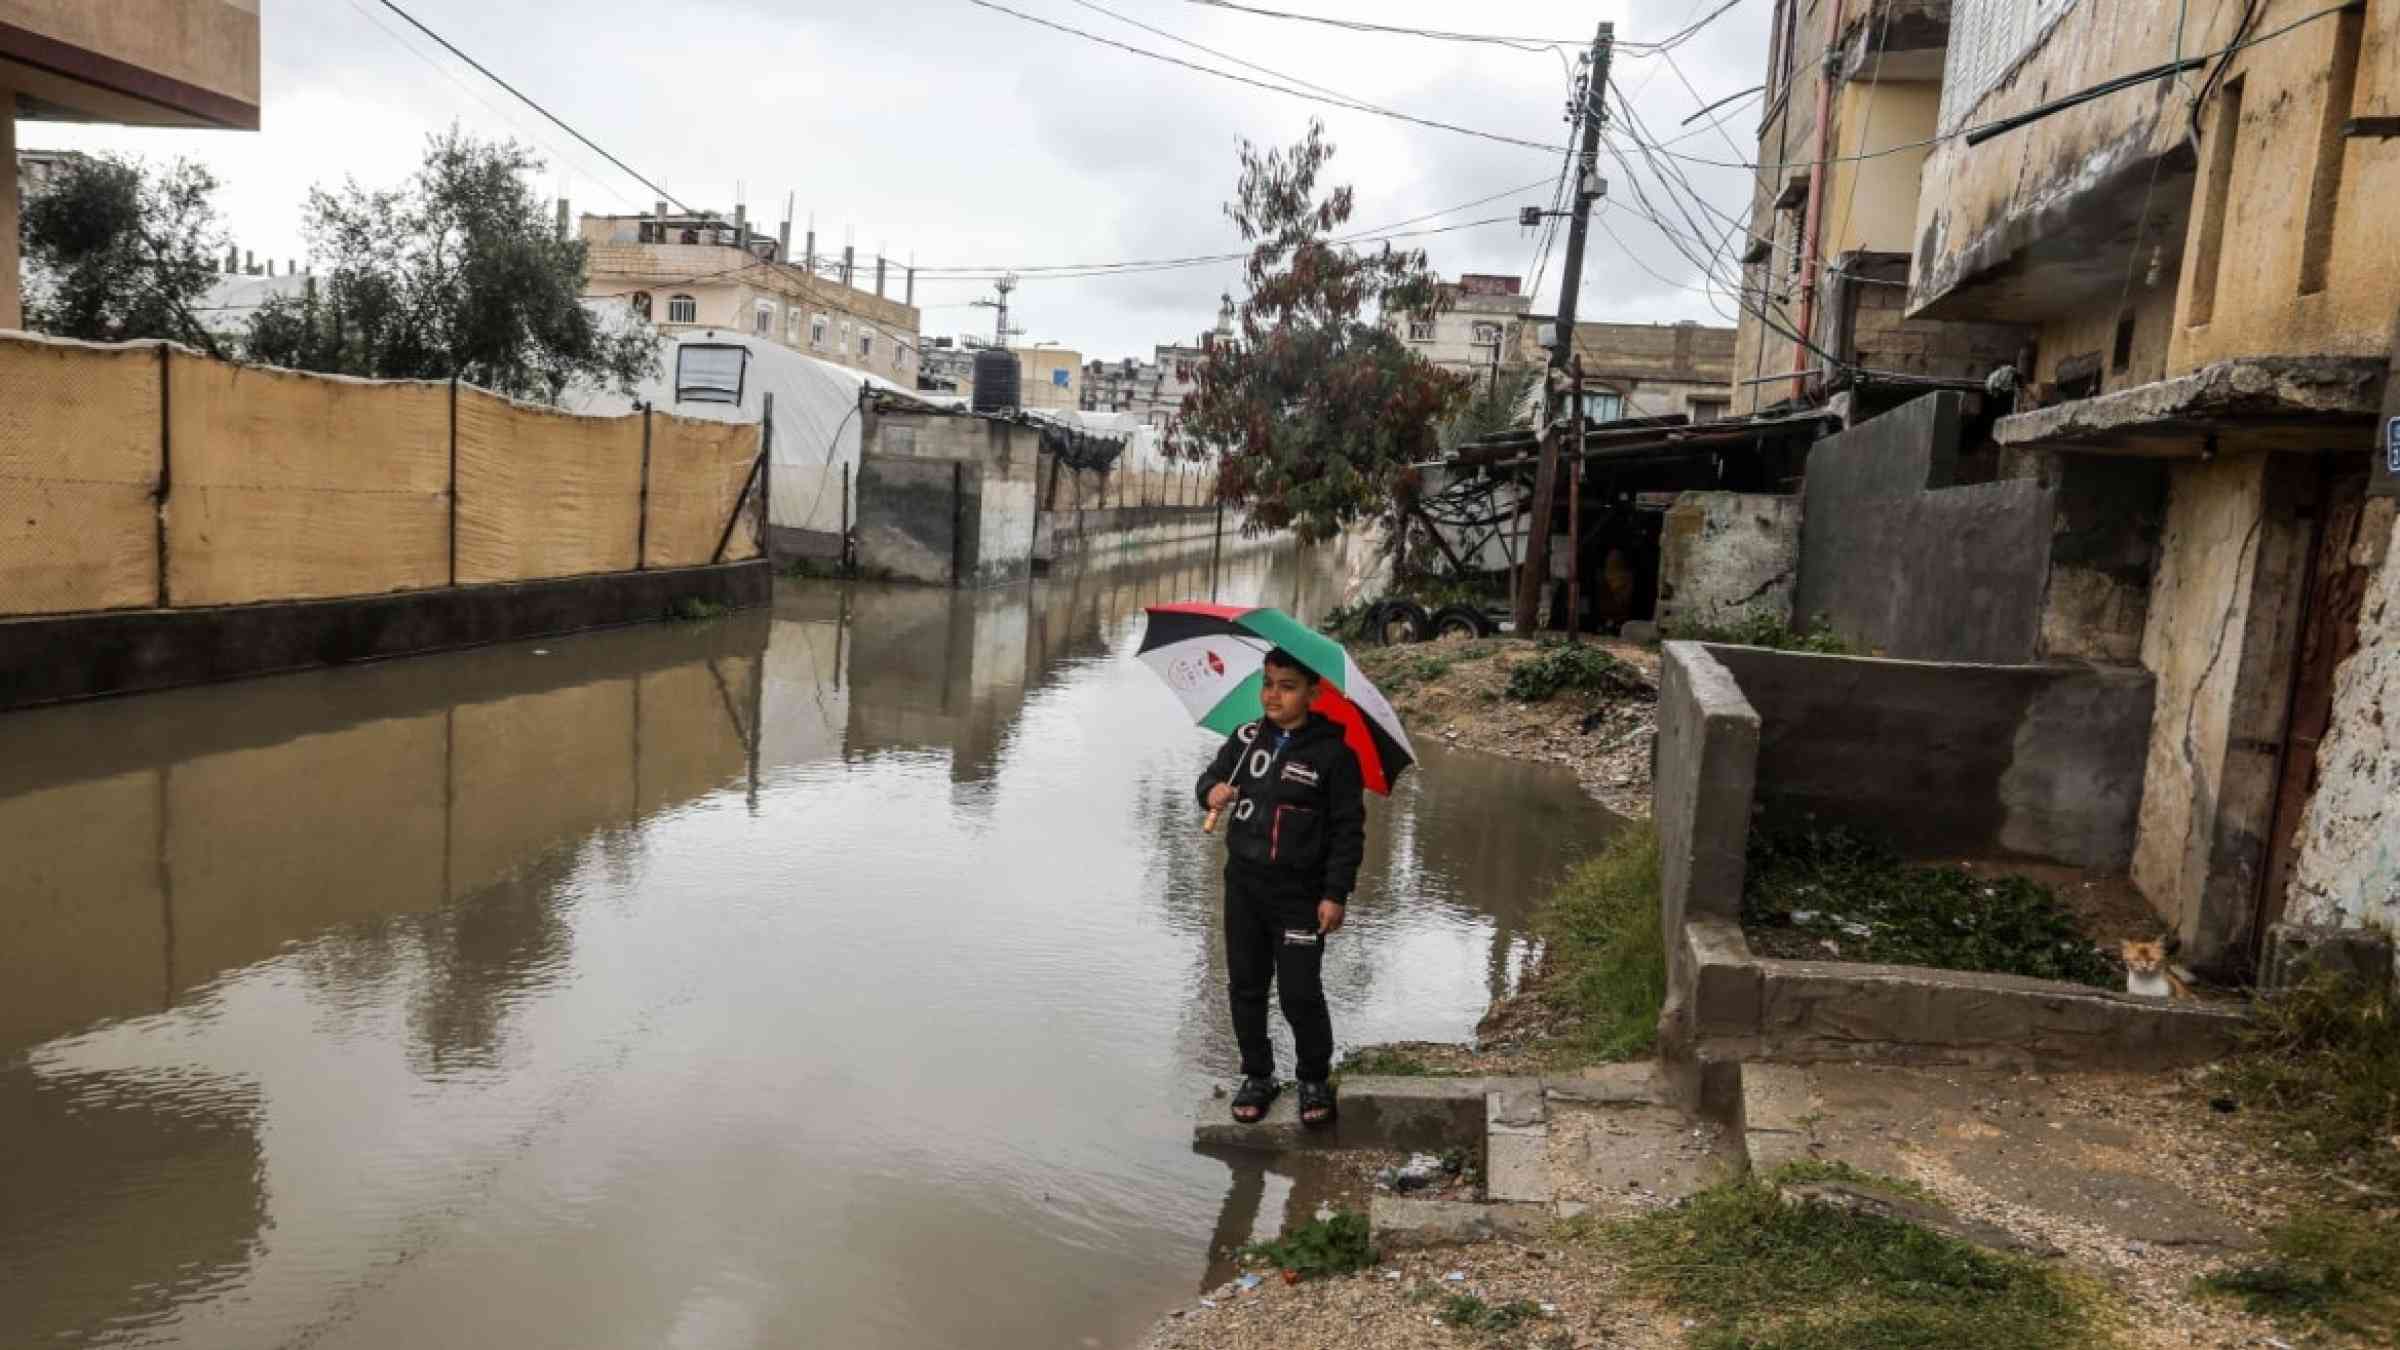 Palestinian houses flooded with rainwater following heavy rains in Rafah in southern Gaza Strip, on February 8, 2023.